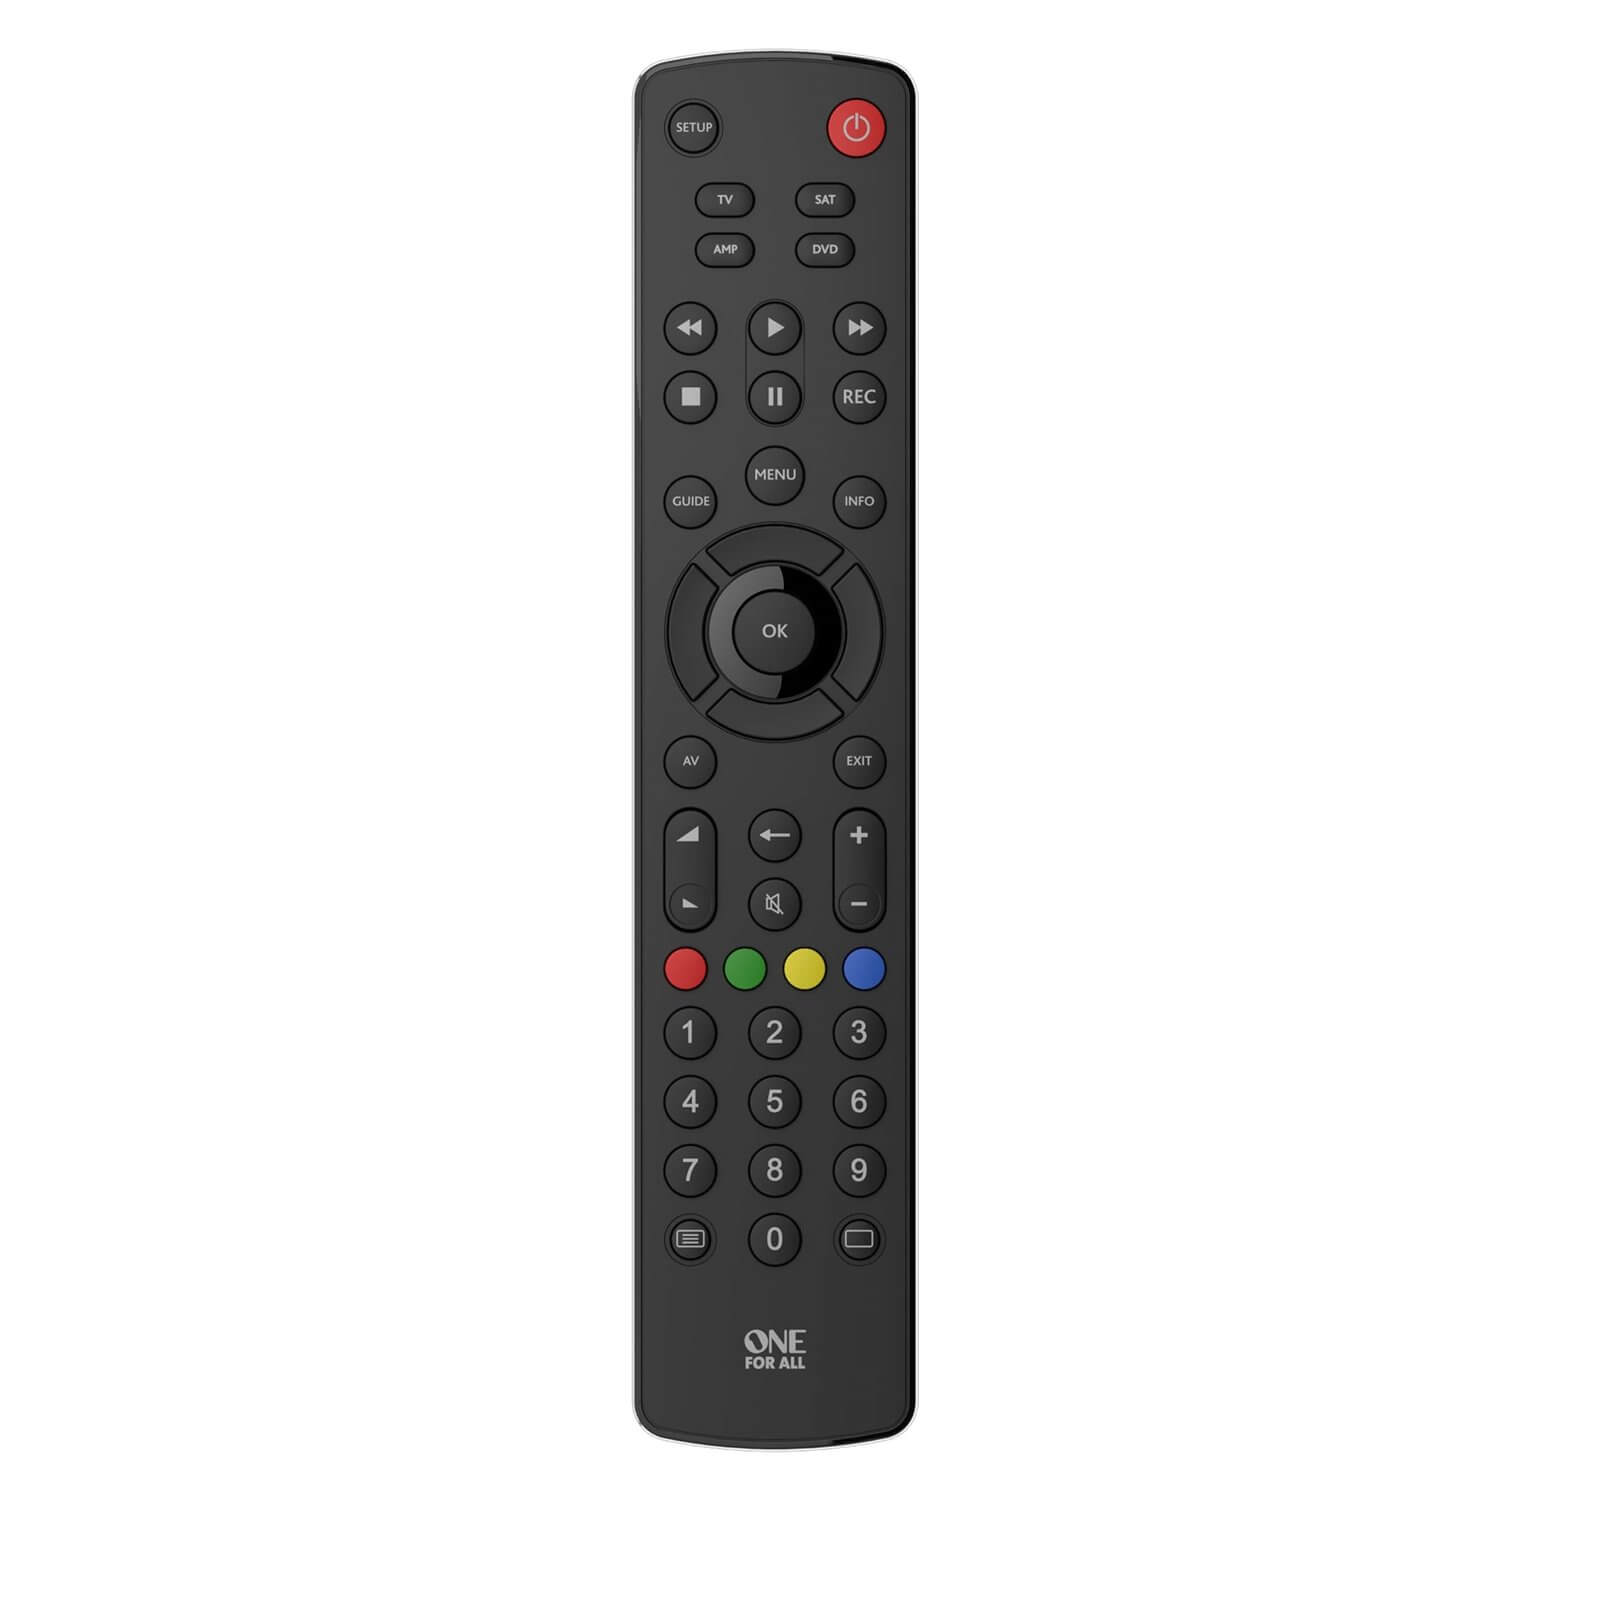 One For All URC 1240 Remote control